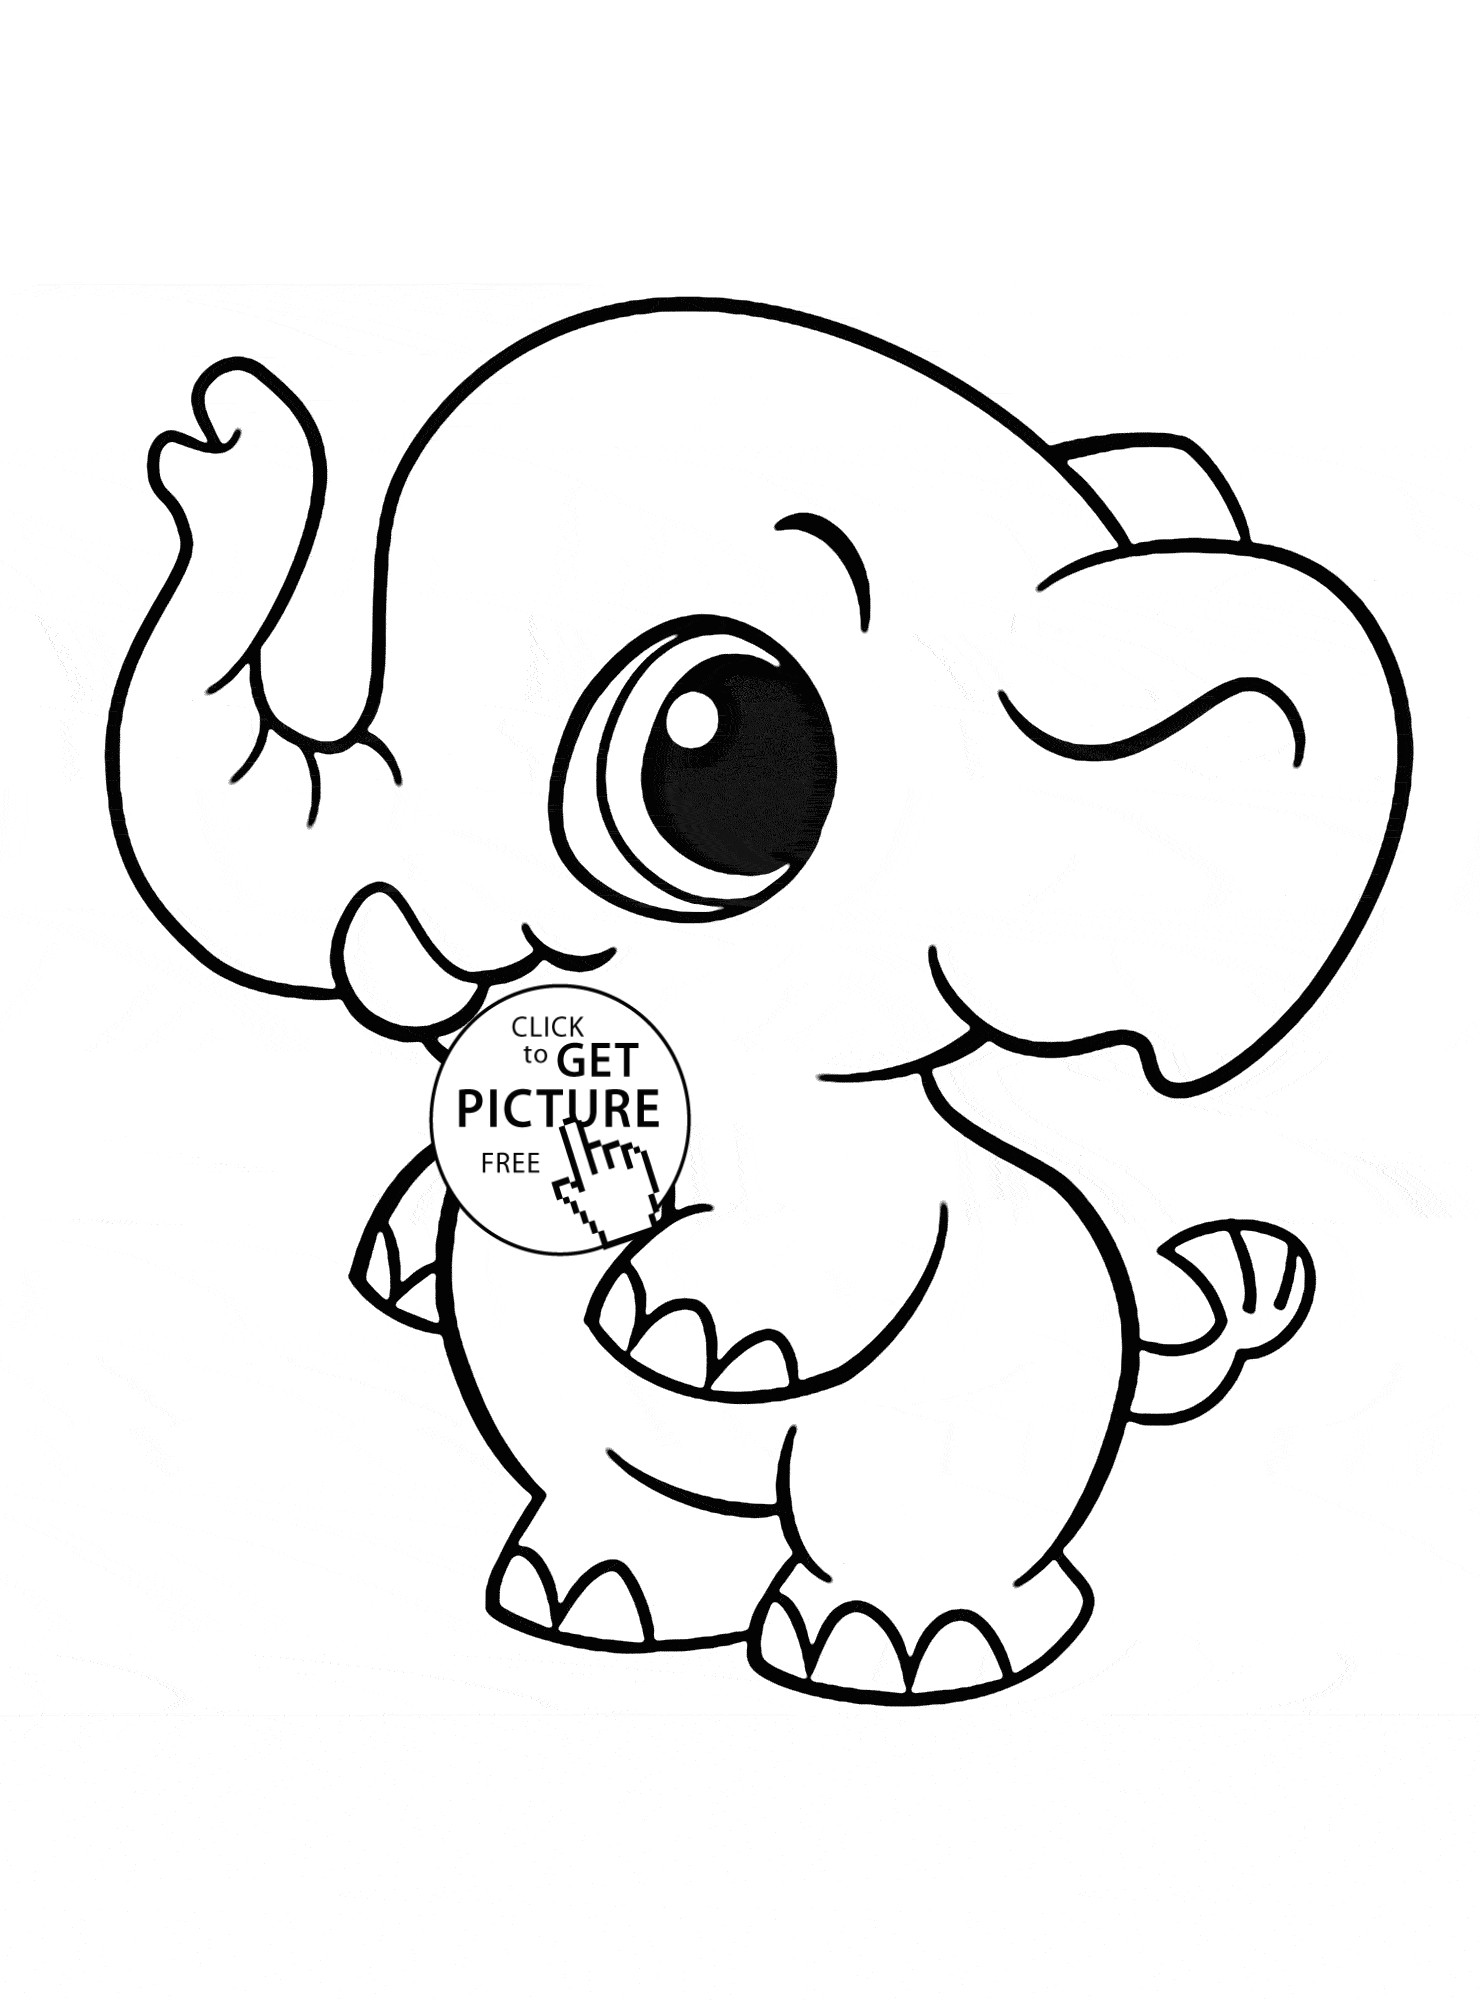 Cute Drawing Of Elephant Funny Animals Coloring Page Cute Dog Coloring Pages Printable